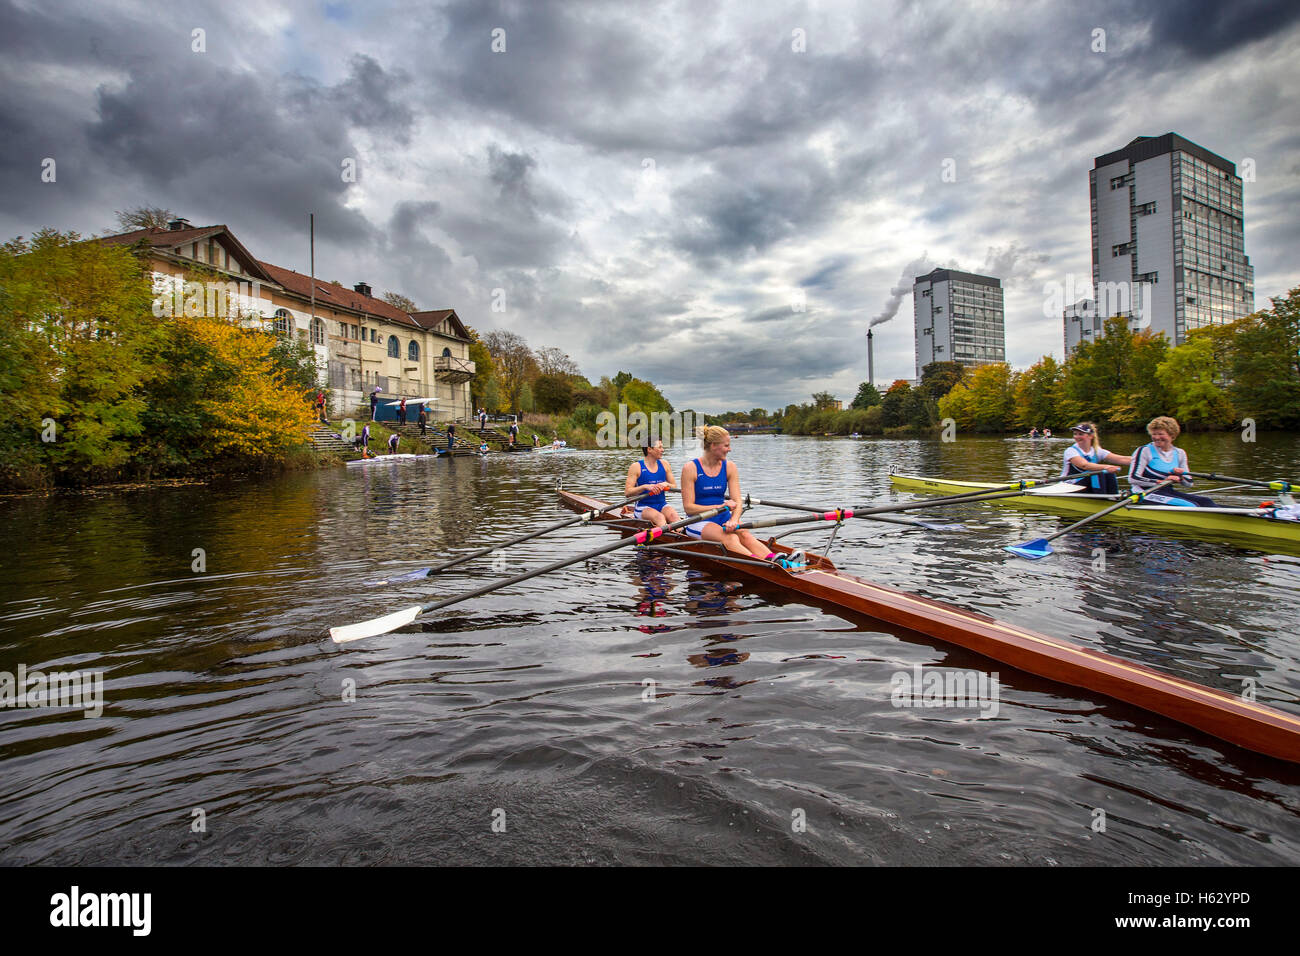 Vogatore Polly Swann sul fiume Clyde con West Boathouse e Gorbals in background Foto Stock